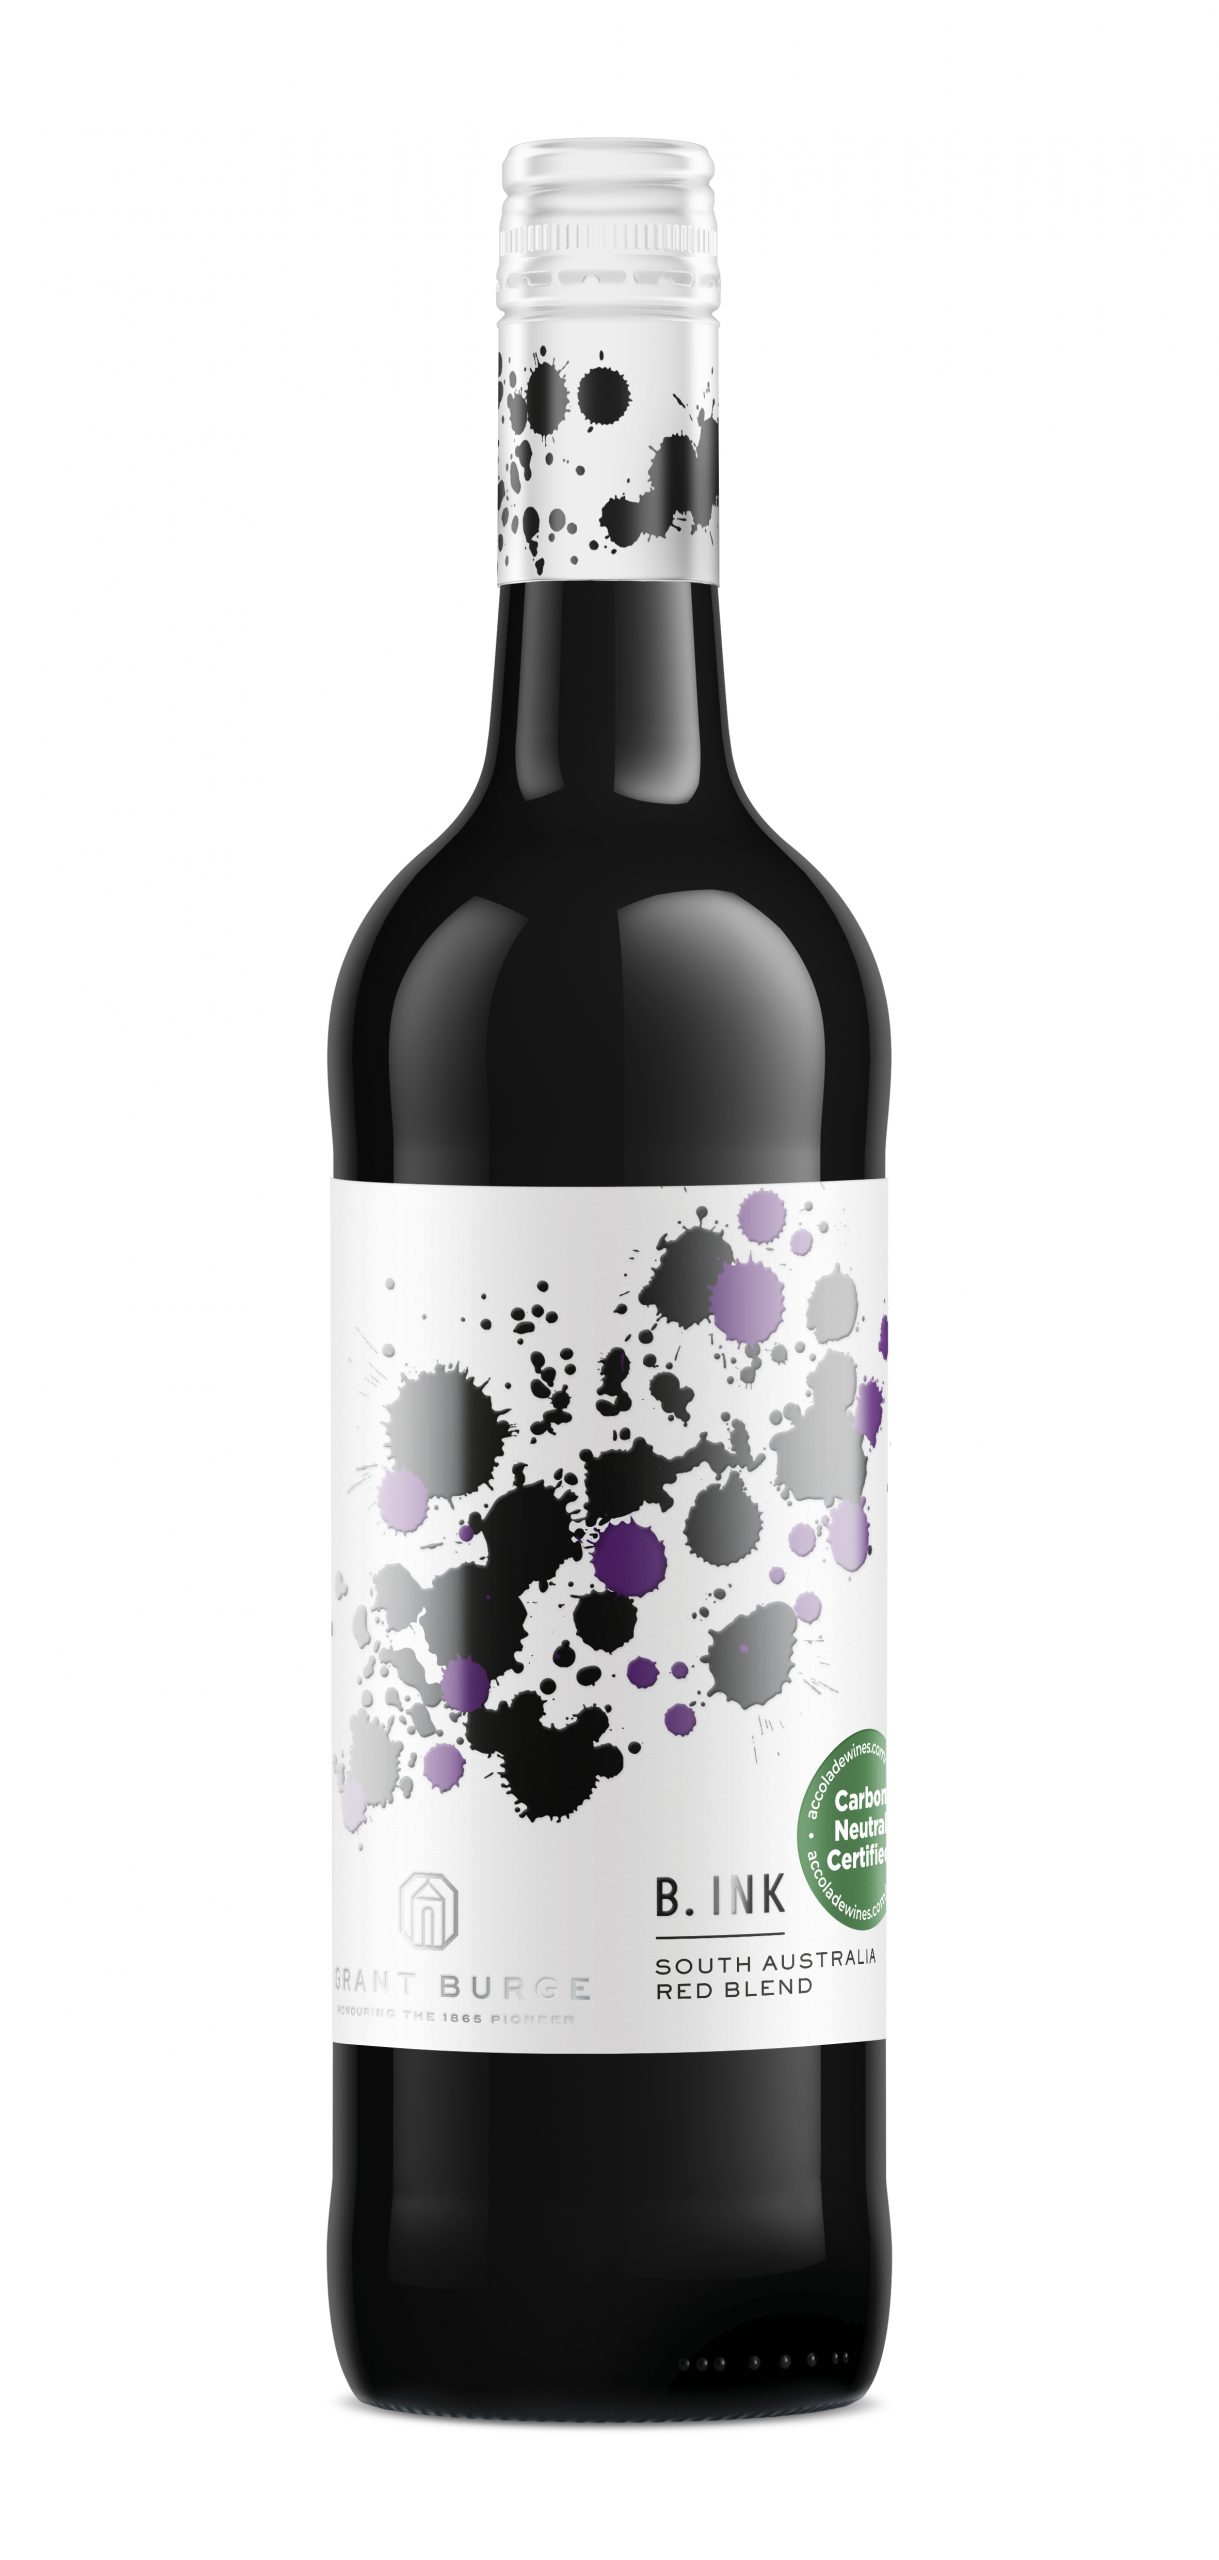 Grant Burge Wines unveils a new range of bold, contemporary wines – B.Ink